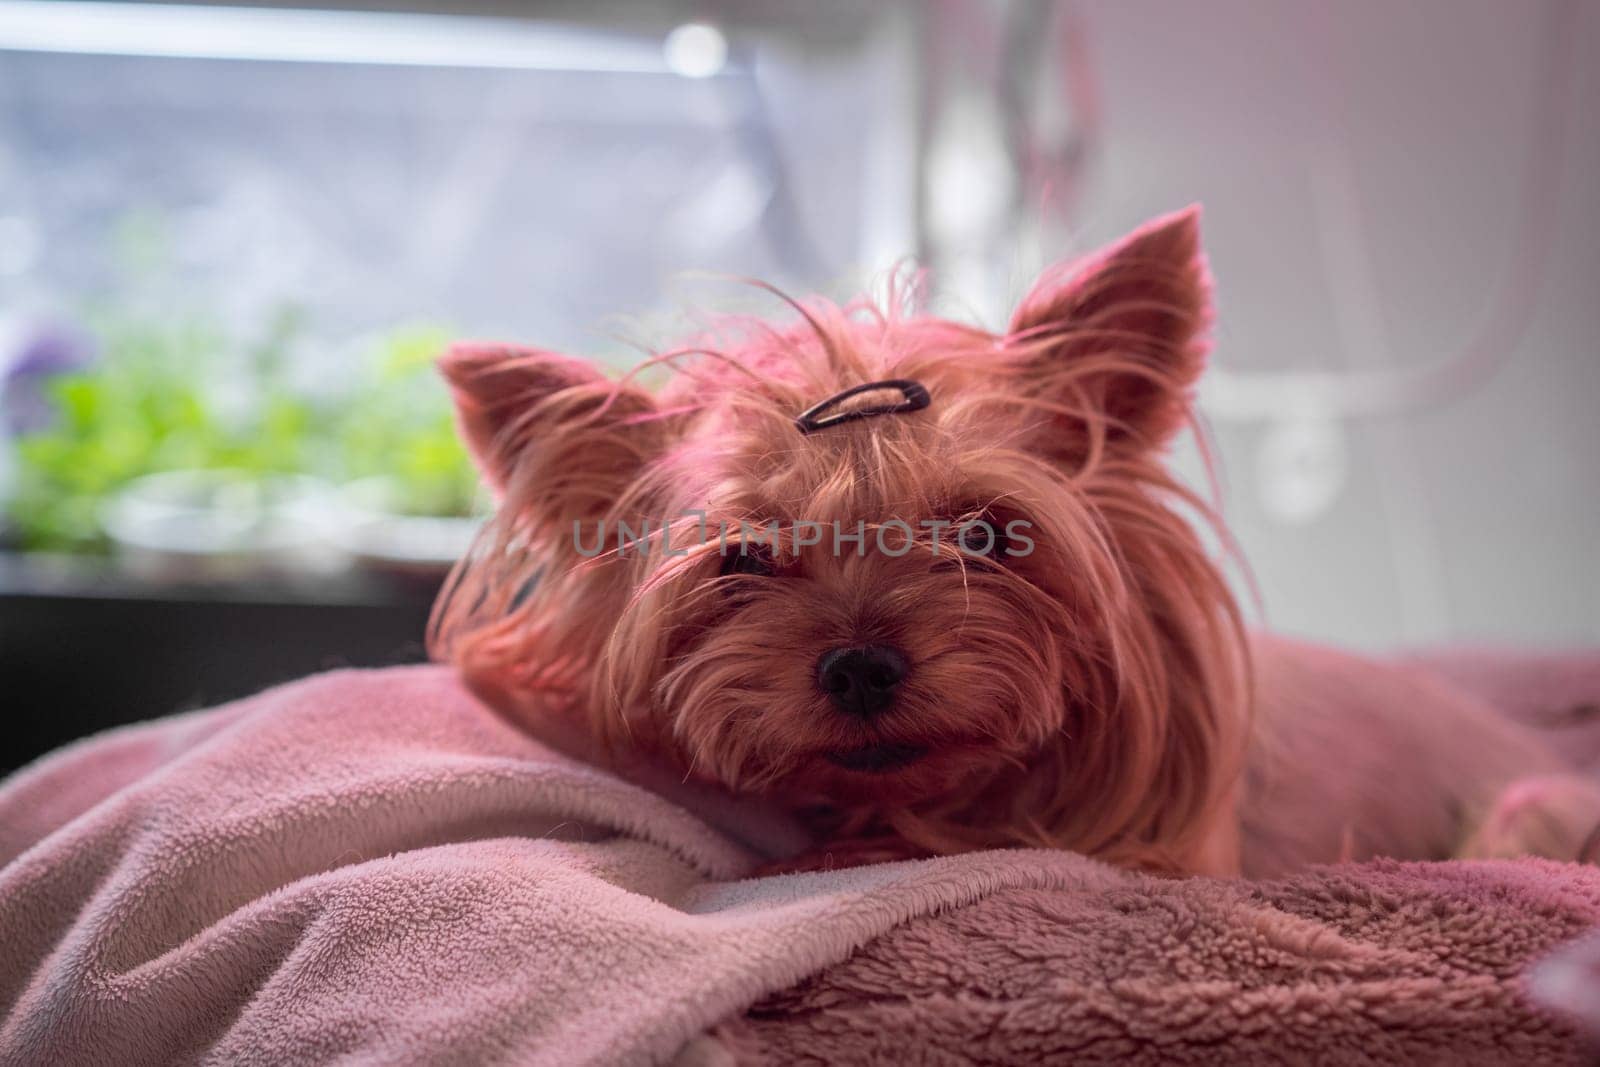 The Yorkshire Terrier dog is lying on the couch and resting. A beautiful pet dog by AnatoliiFoto